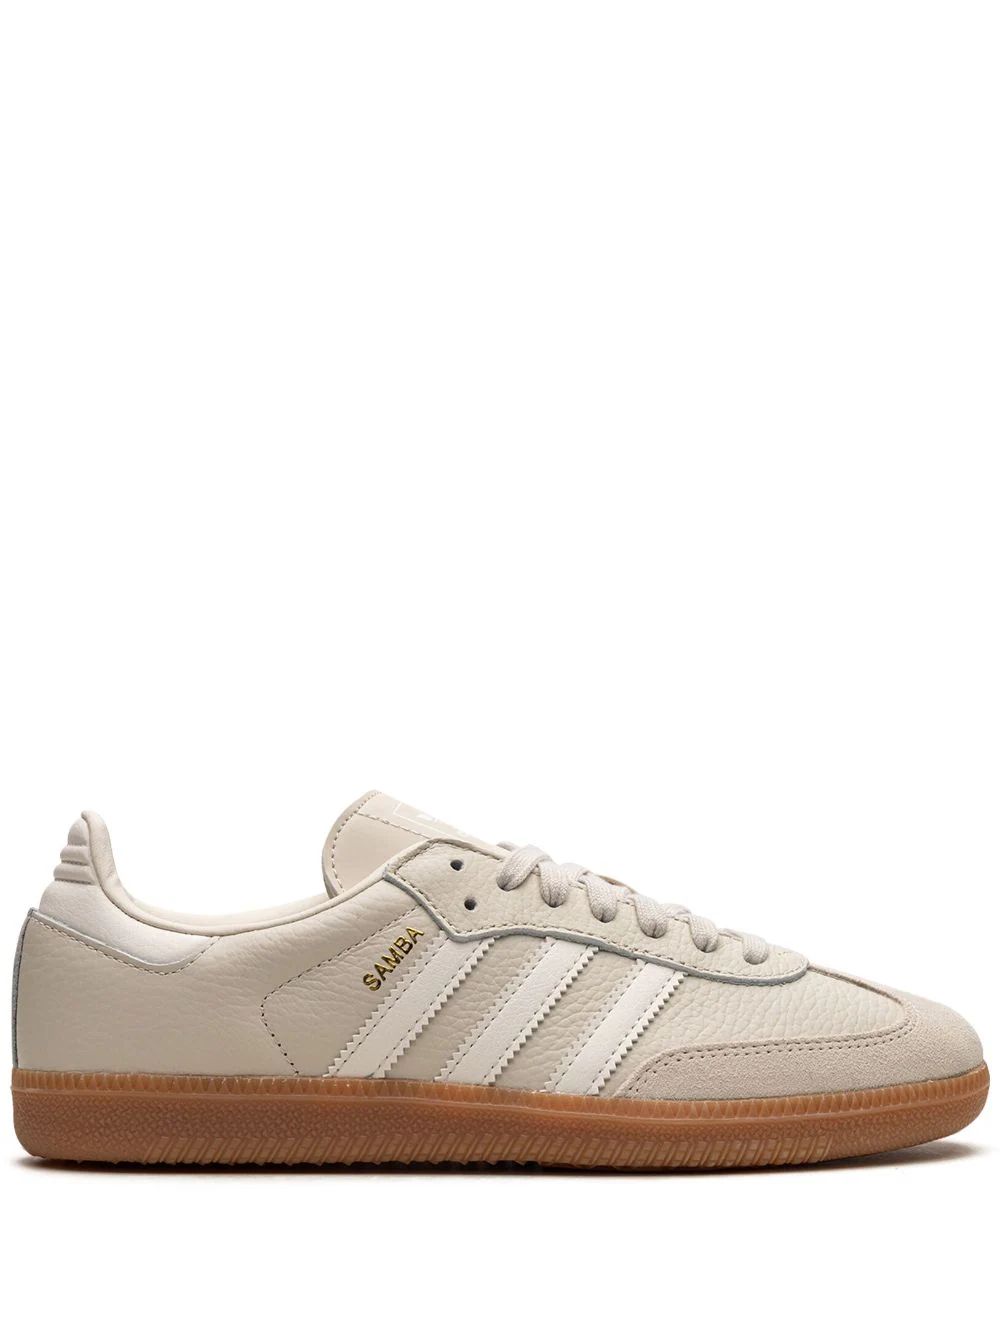 The DetailsadidasSamba OG "Beige/White" sneakersFirst released in 1950, adidas' Samba sneakers we... | Farfetch Global